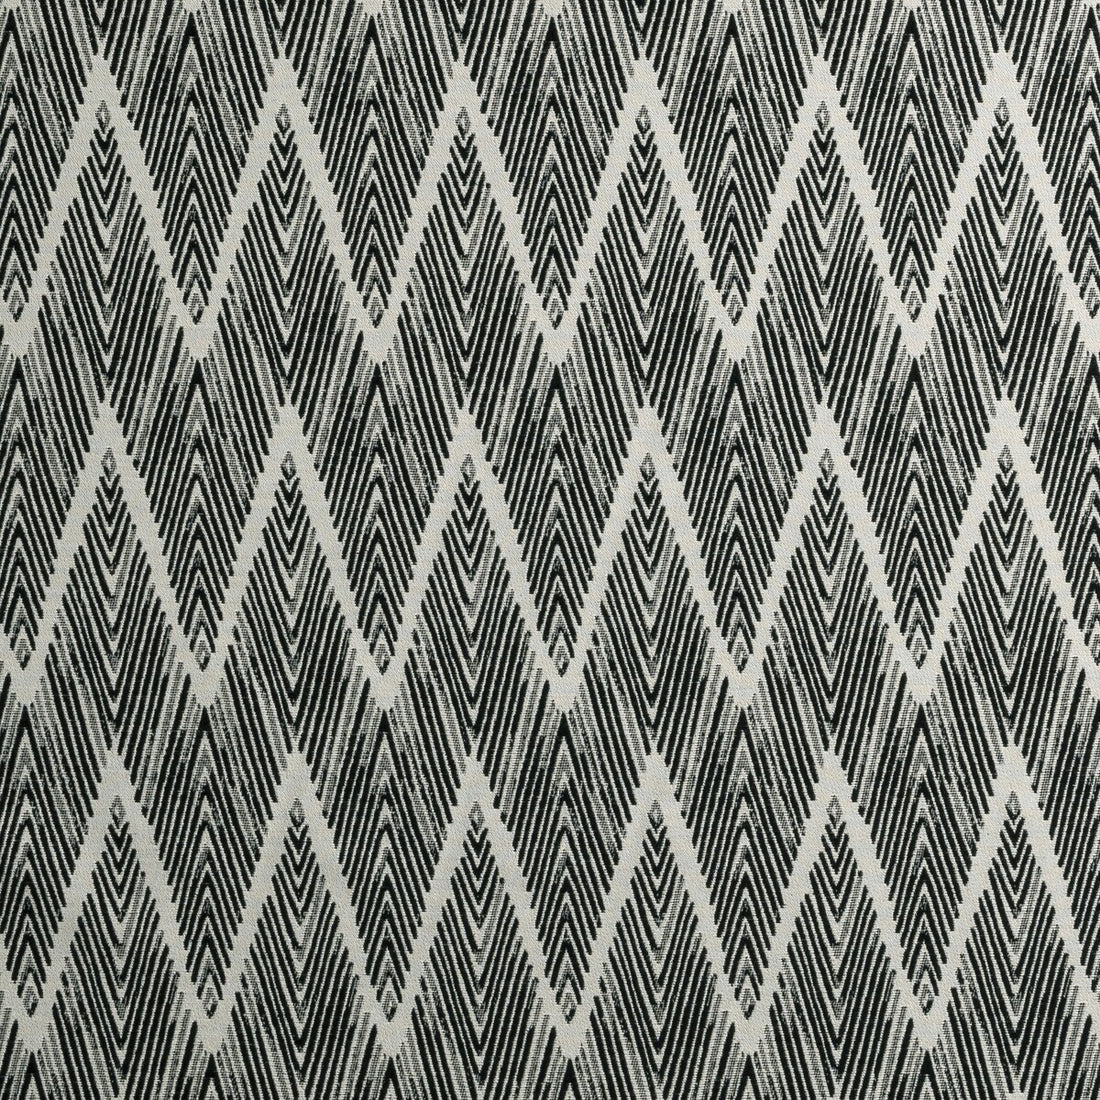 Bw1022 fabric in black/white color - pattern F0895/01.CAC.0 - by Clarke And Clarke in the Clarke &amp; Clarke Black + White collection